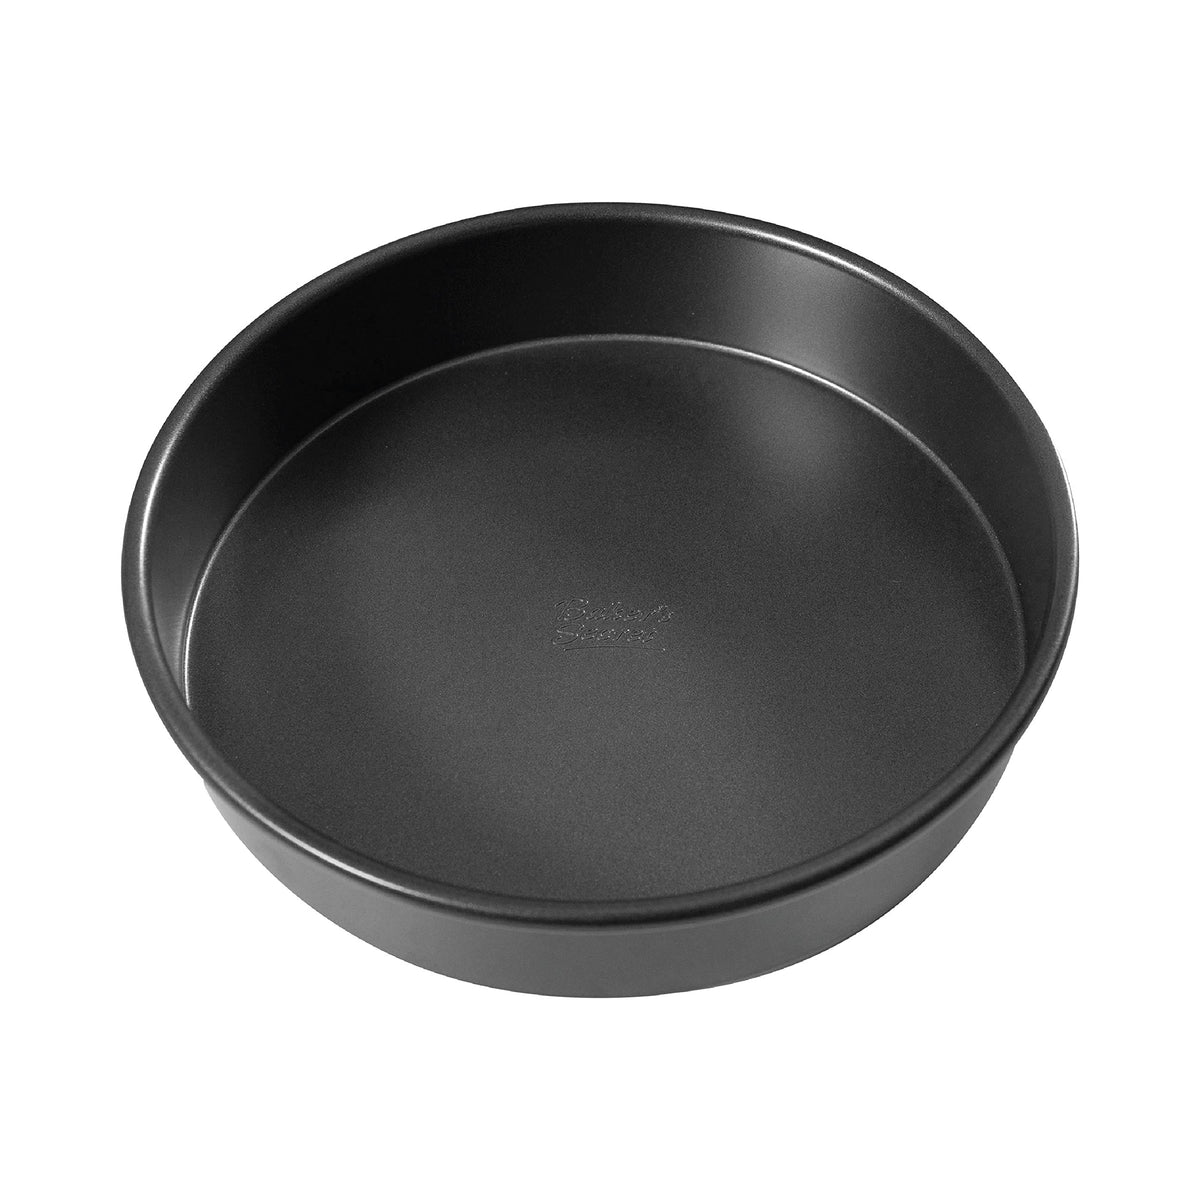 Baker's Secret for Fluted Cake Pan, Fluted Cake Pans, Perfect for Fluted  Cakes, Die Cast Aluminum Cake Pans, 2 Layers Non-stick Coating, Novelty  Cake